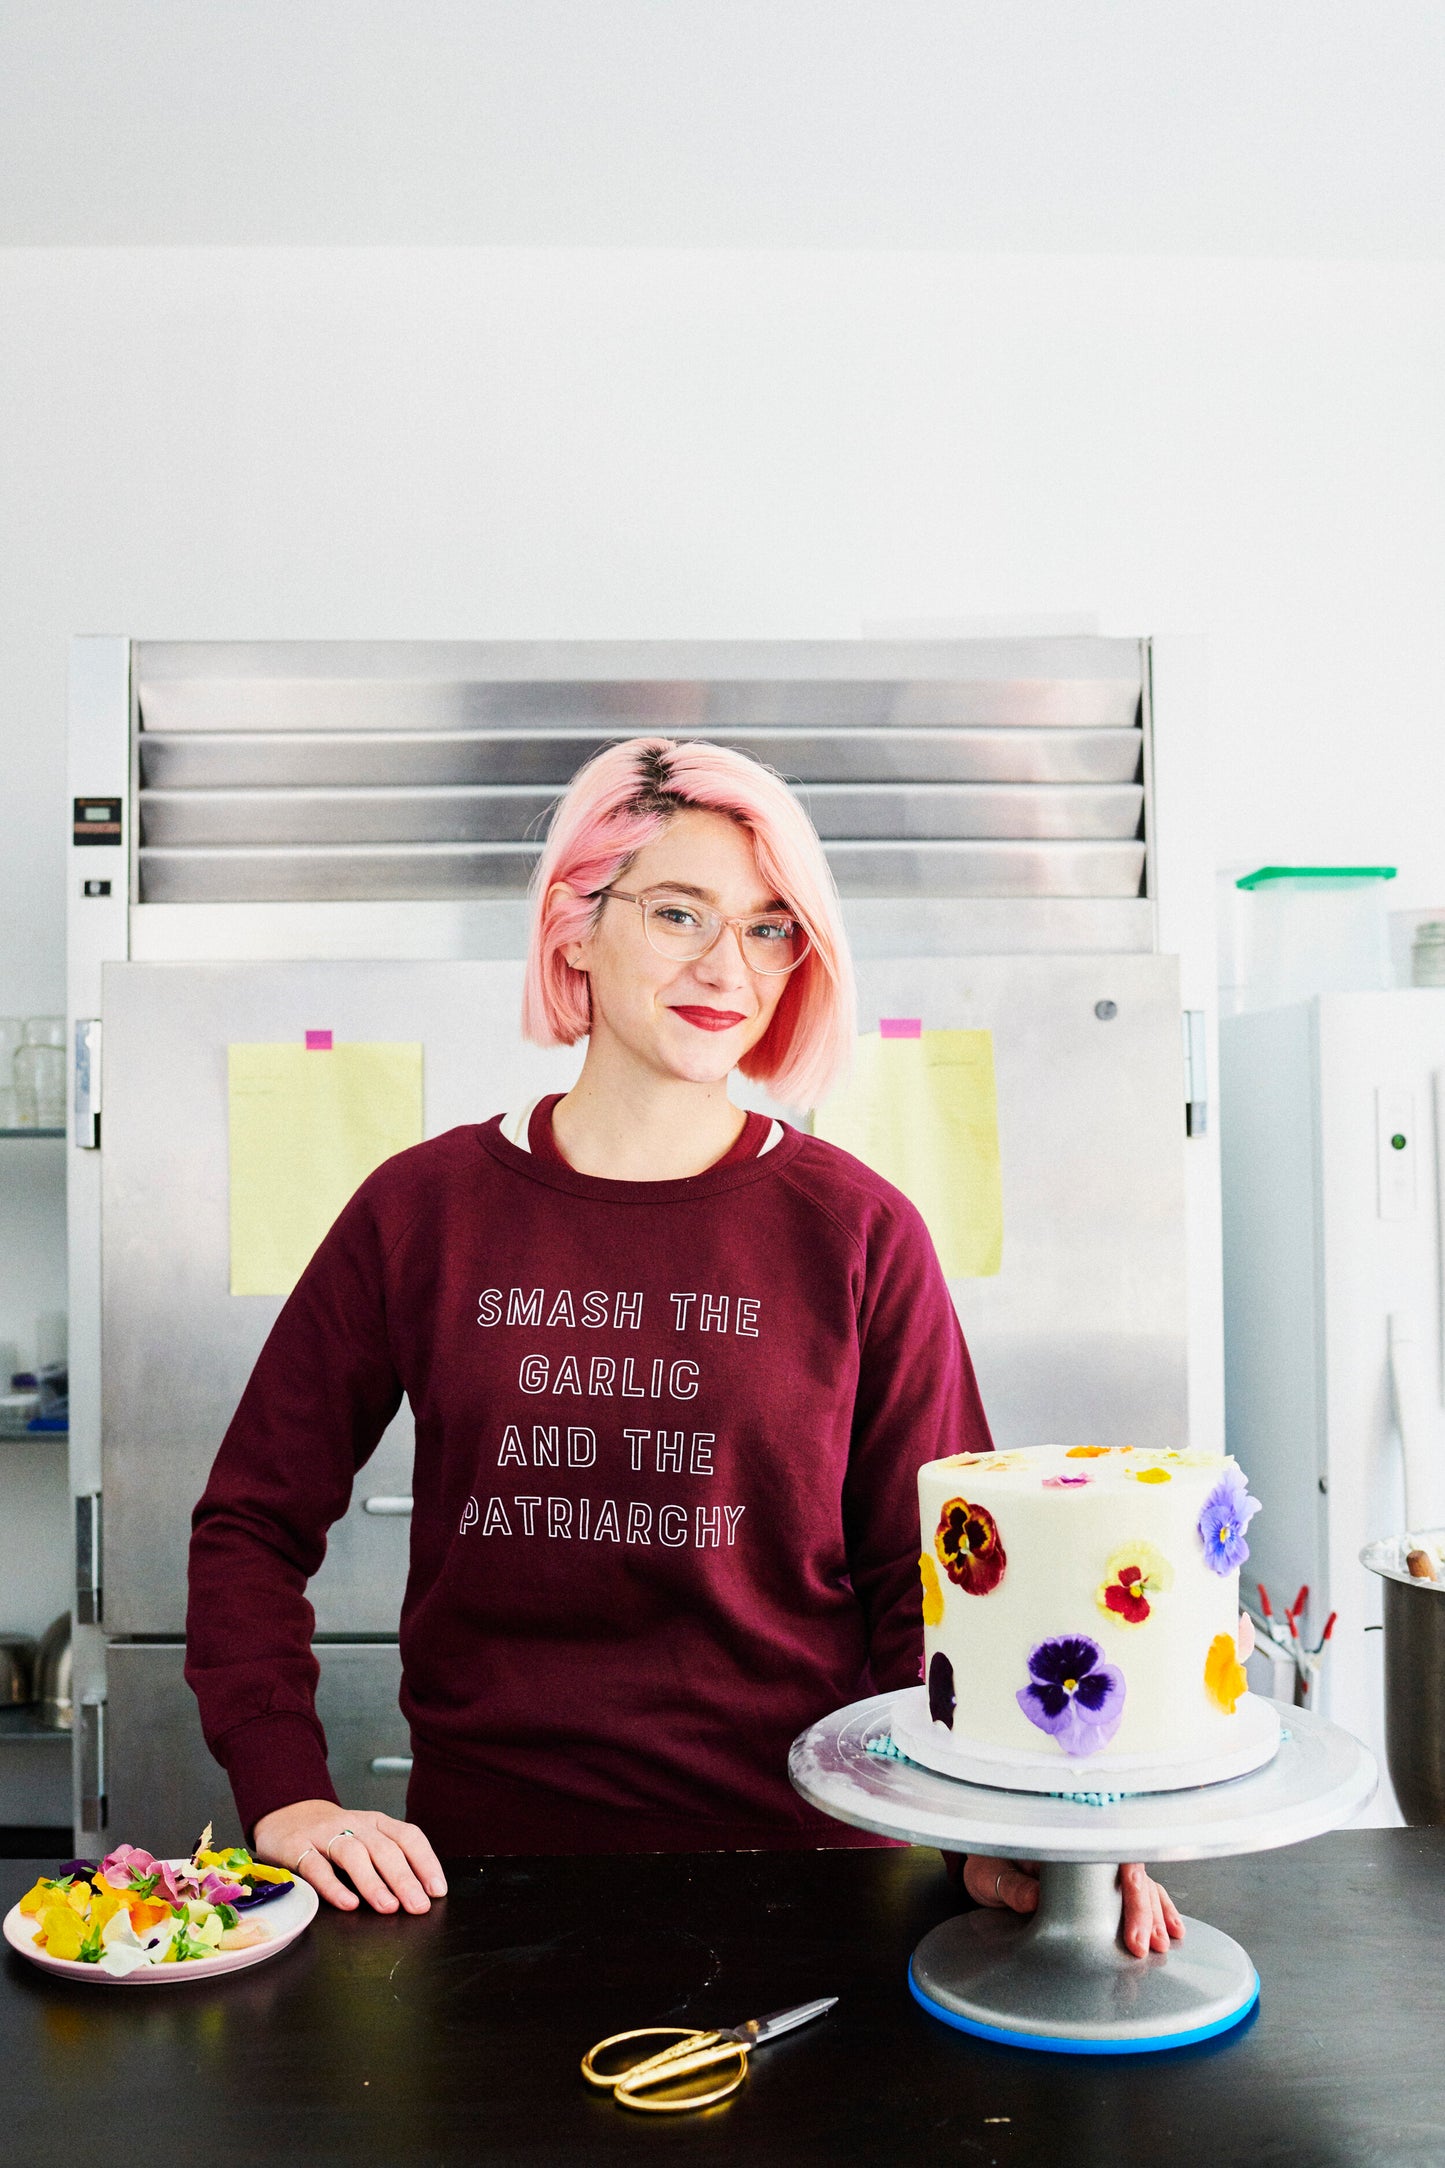 A woman wearing a maroon "Smash the Garlic and the Patriarchy" crewneck stands with a cake